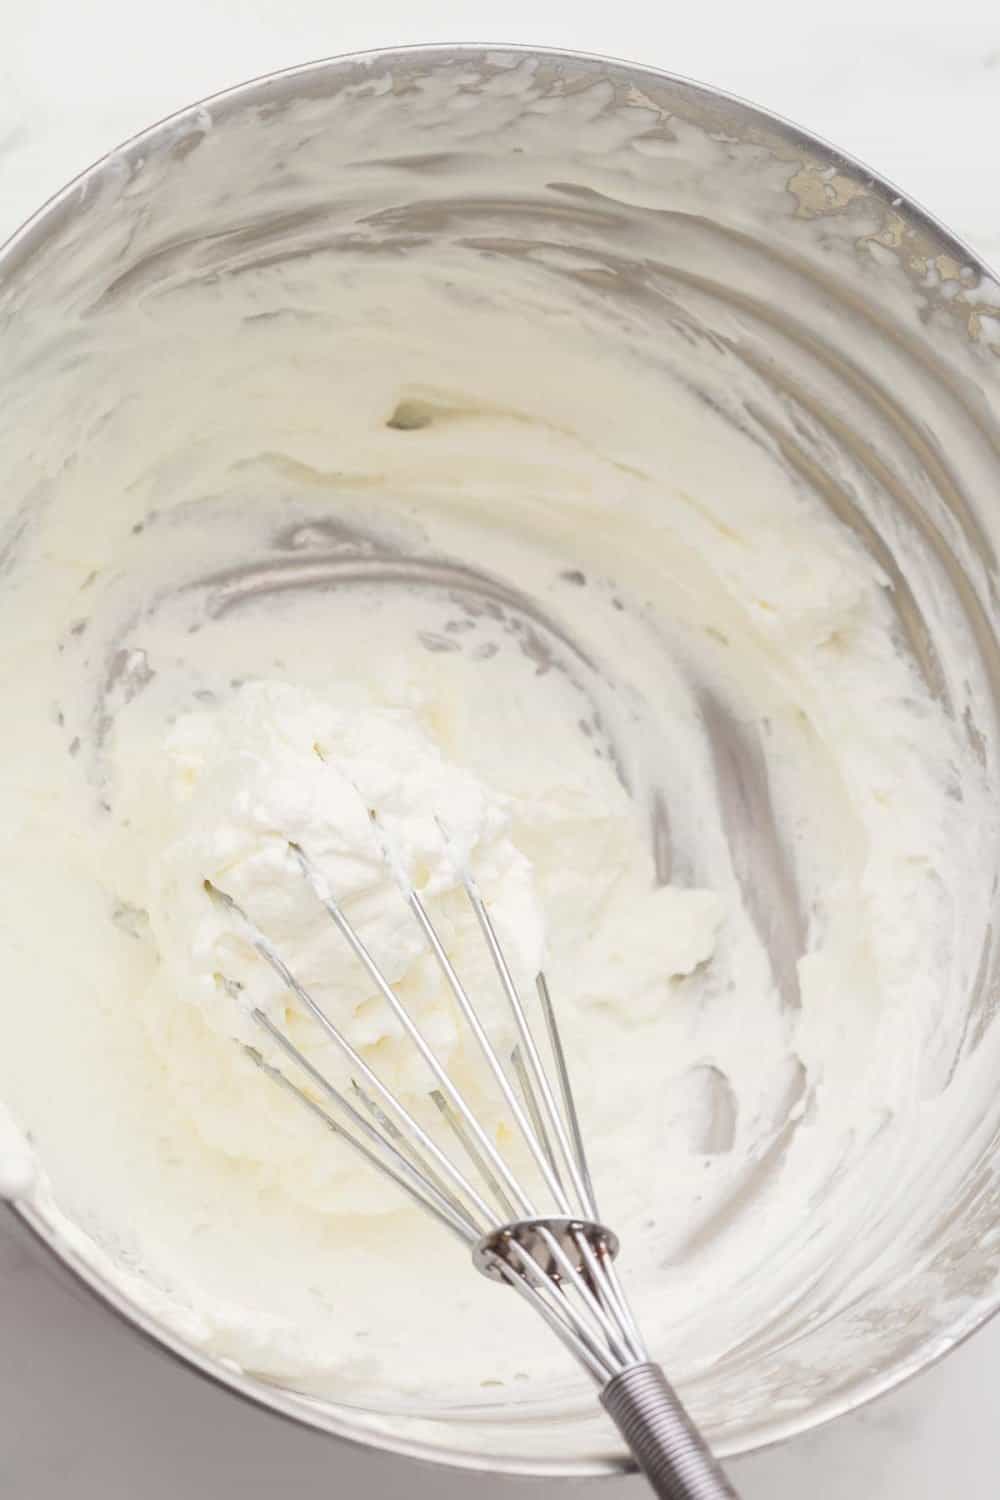 metal mixing bowl with whipping cream and a whisk inside